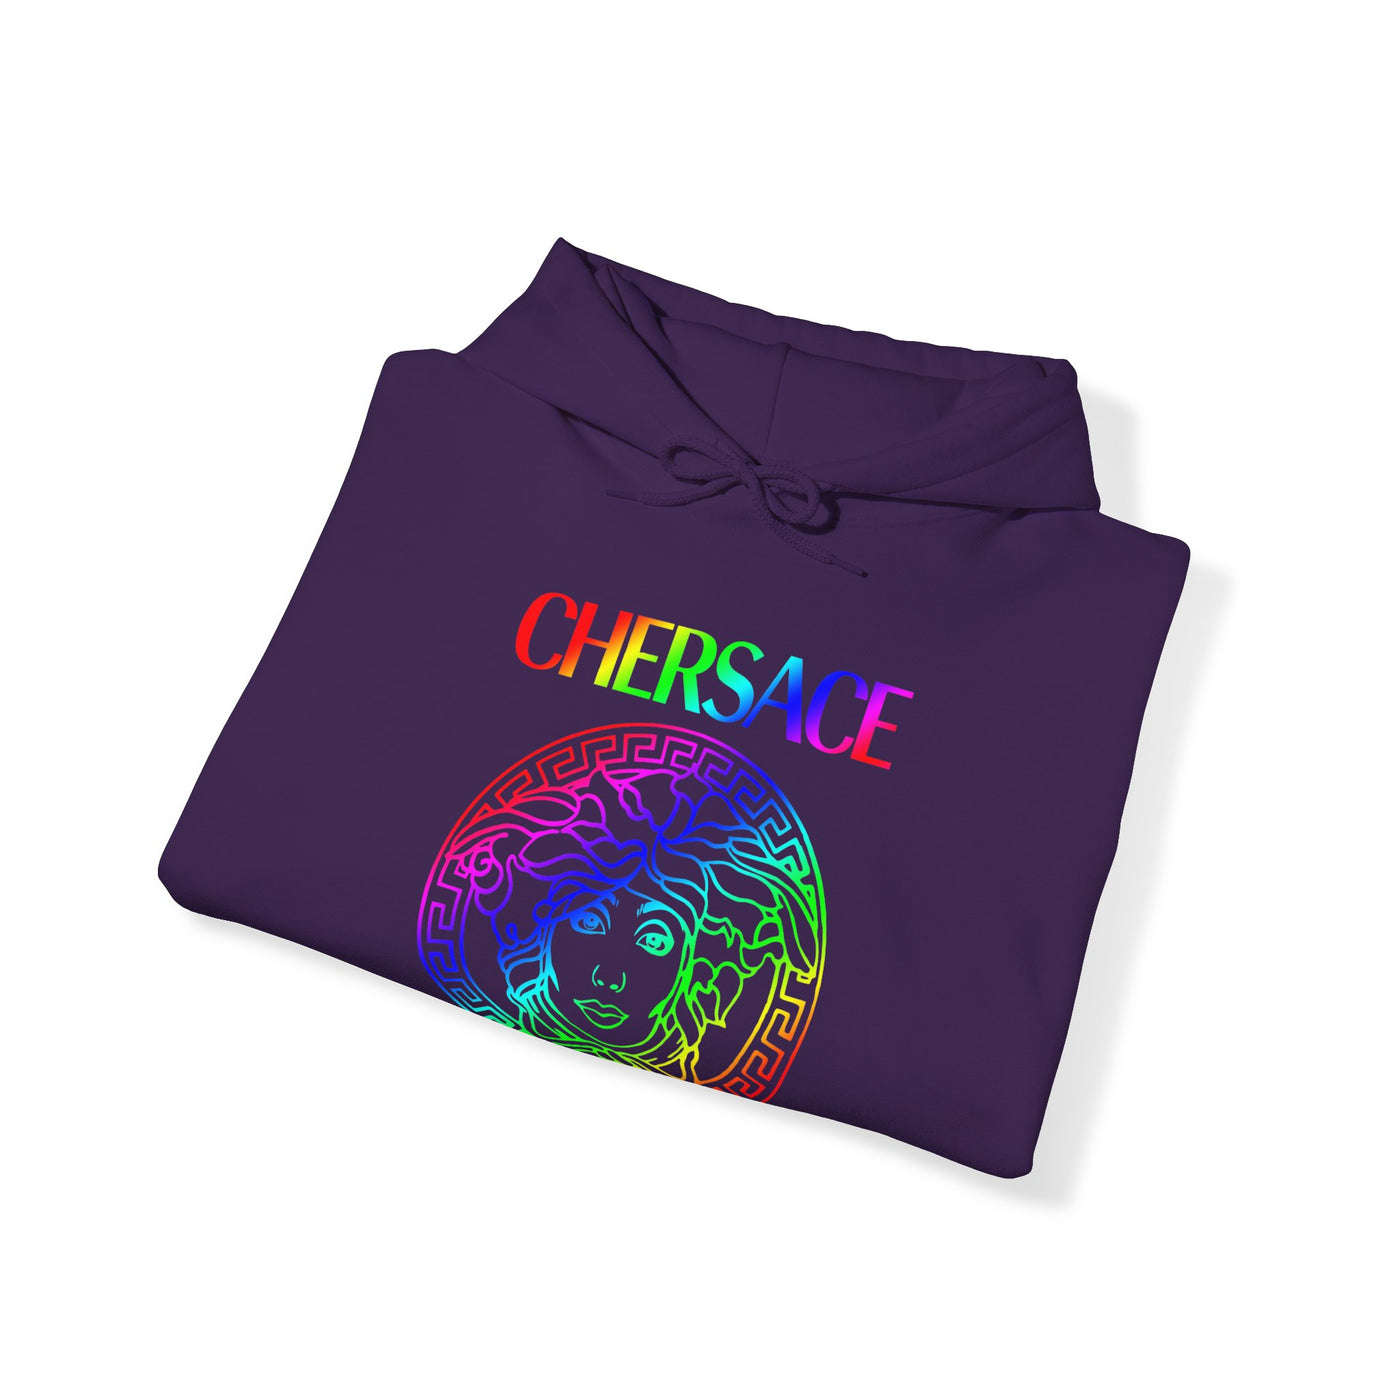 Detail of the Cher CHERSACE Premium Hoodie by Gllamazon. Color: Purple.